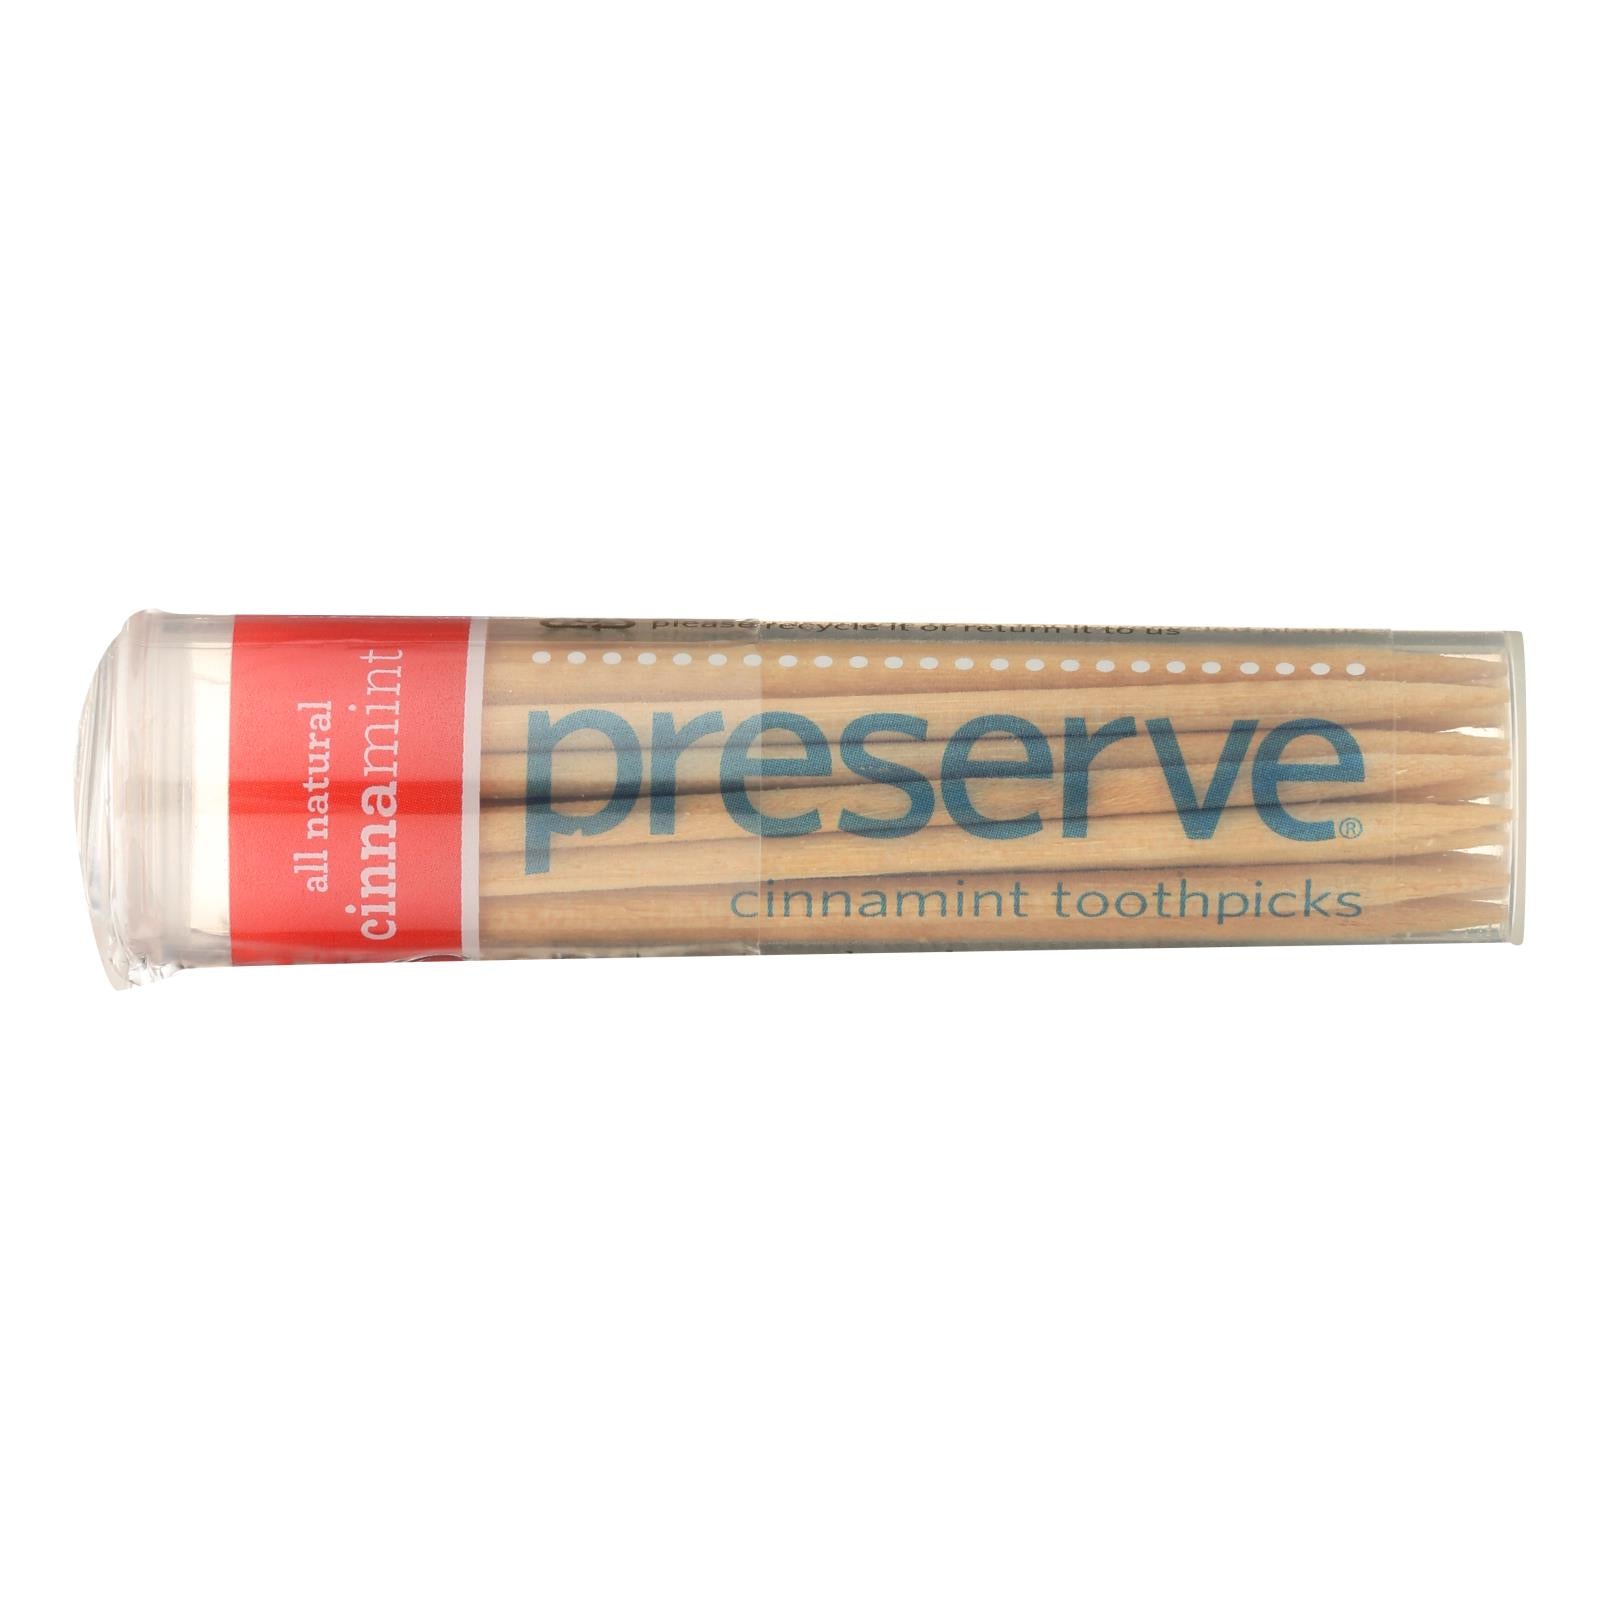 Preserve Flavored Toothpicks Cinnamint - 35 Pieces - Case of 24